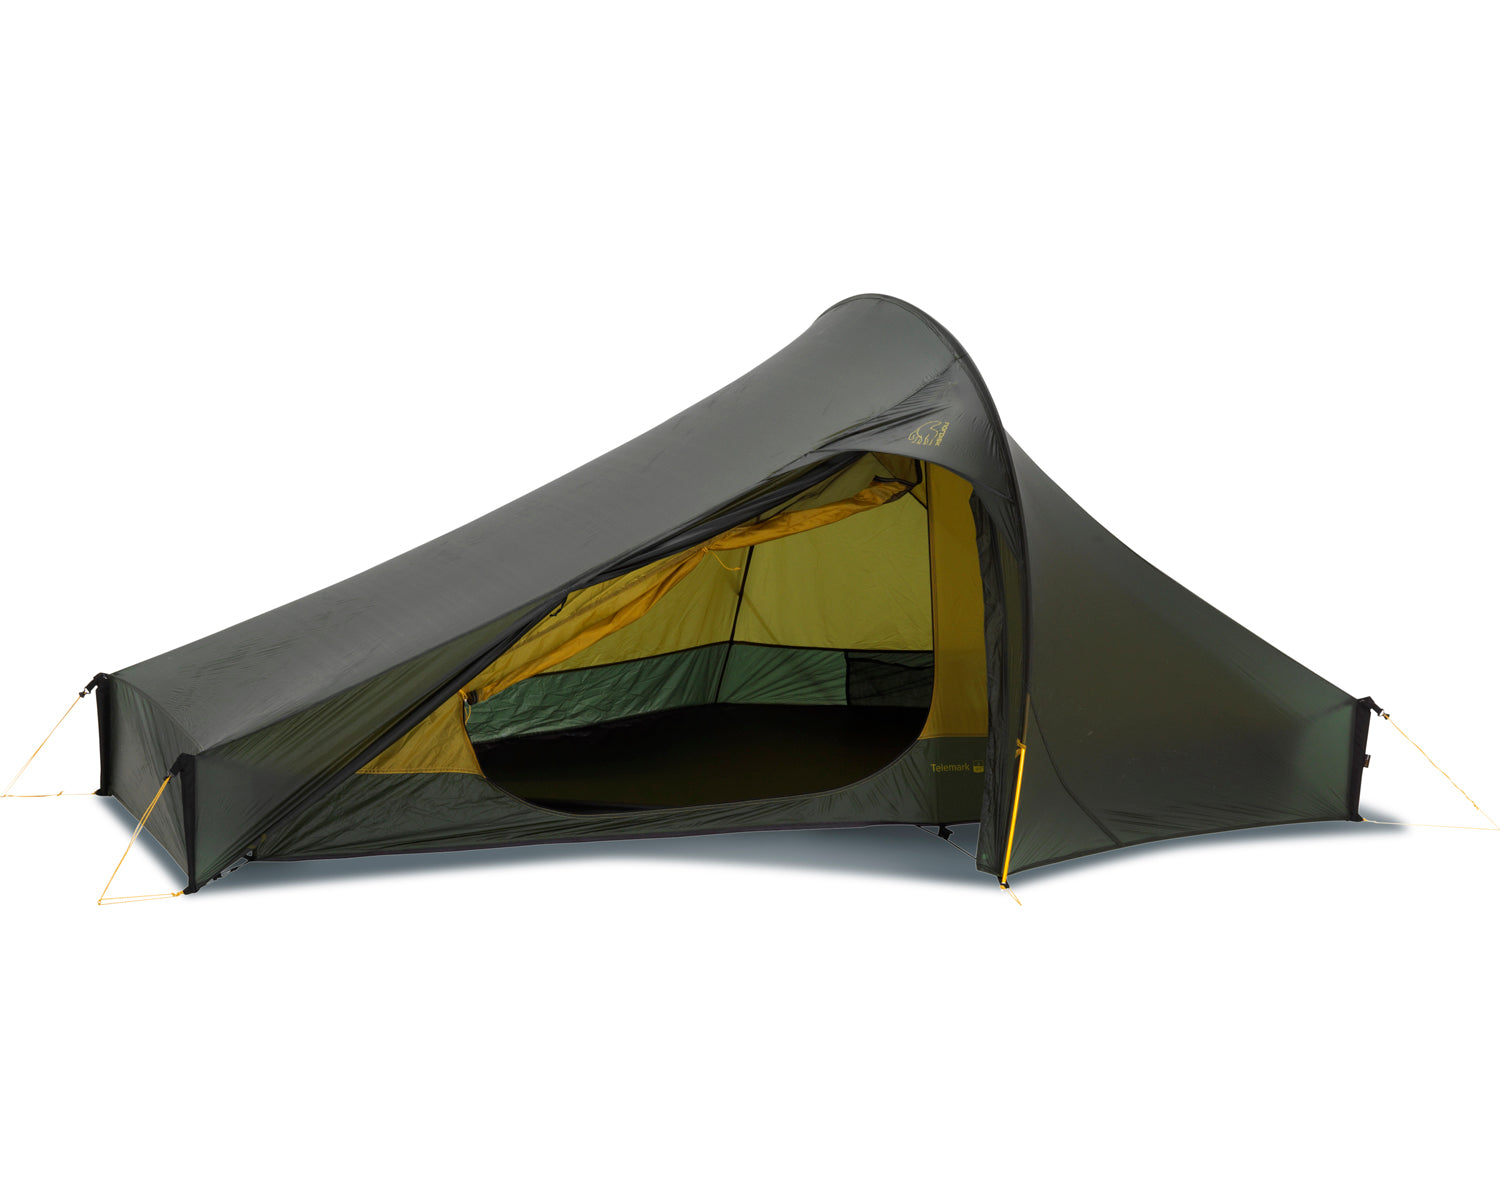 Telemark 2 LW tent - 2 person - Forest Green